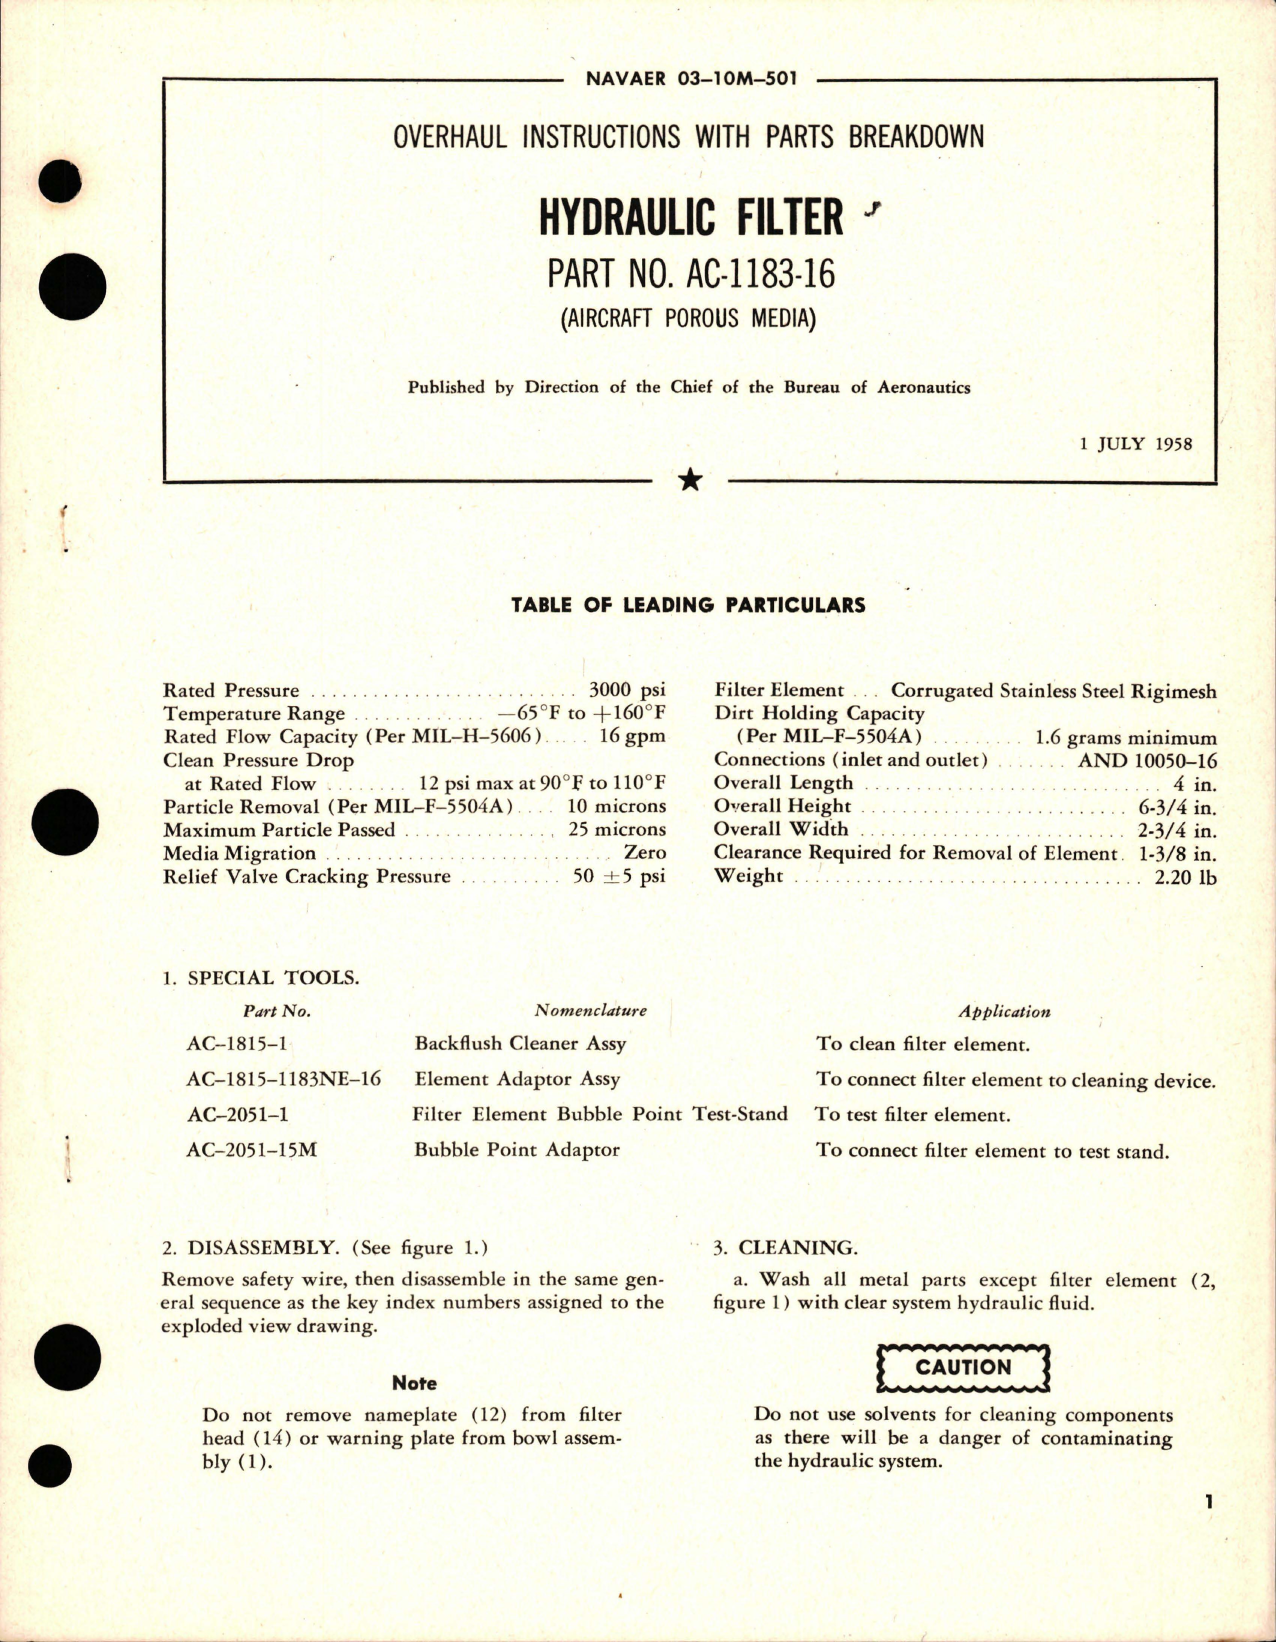 Sample page 1 from AirCorps Library document: Overhaul Instructions with Parts Breakdown for Hydraulic Filter - Part AC-1183-16